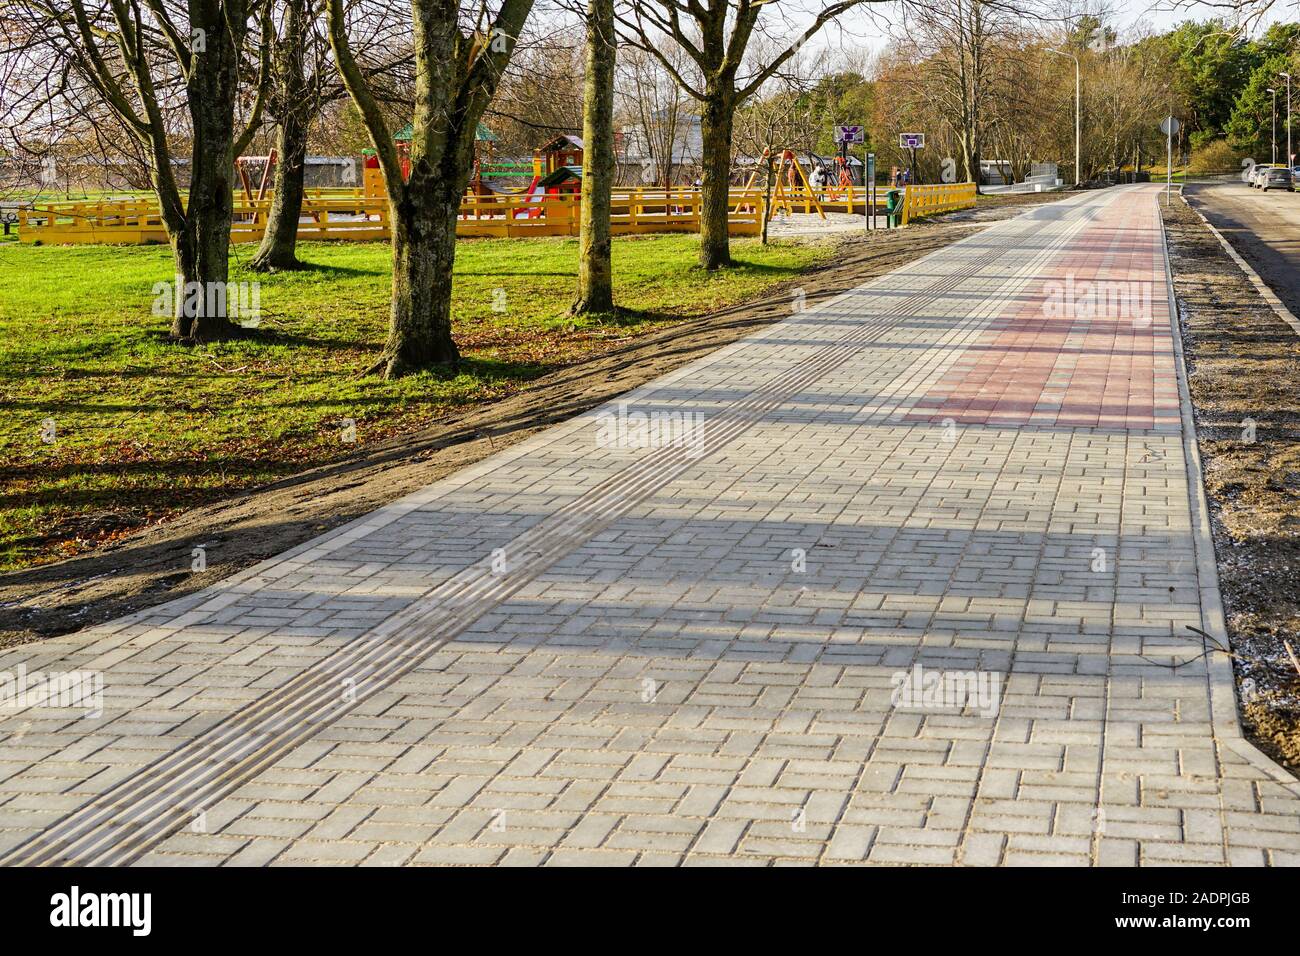 new paved walkway with bicycle lane and with guidelines for visually impaired people Stock Photo